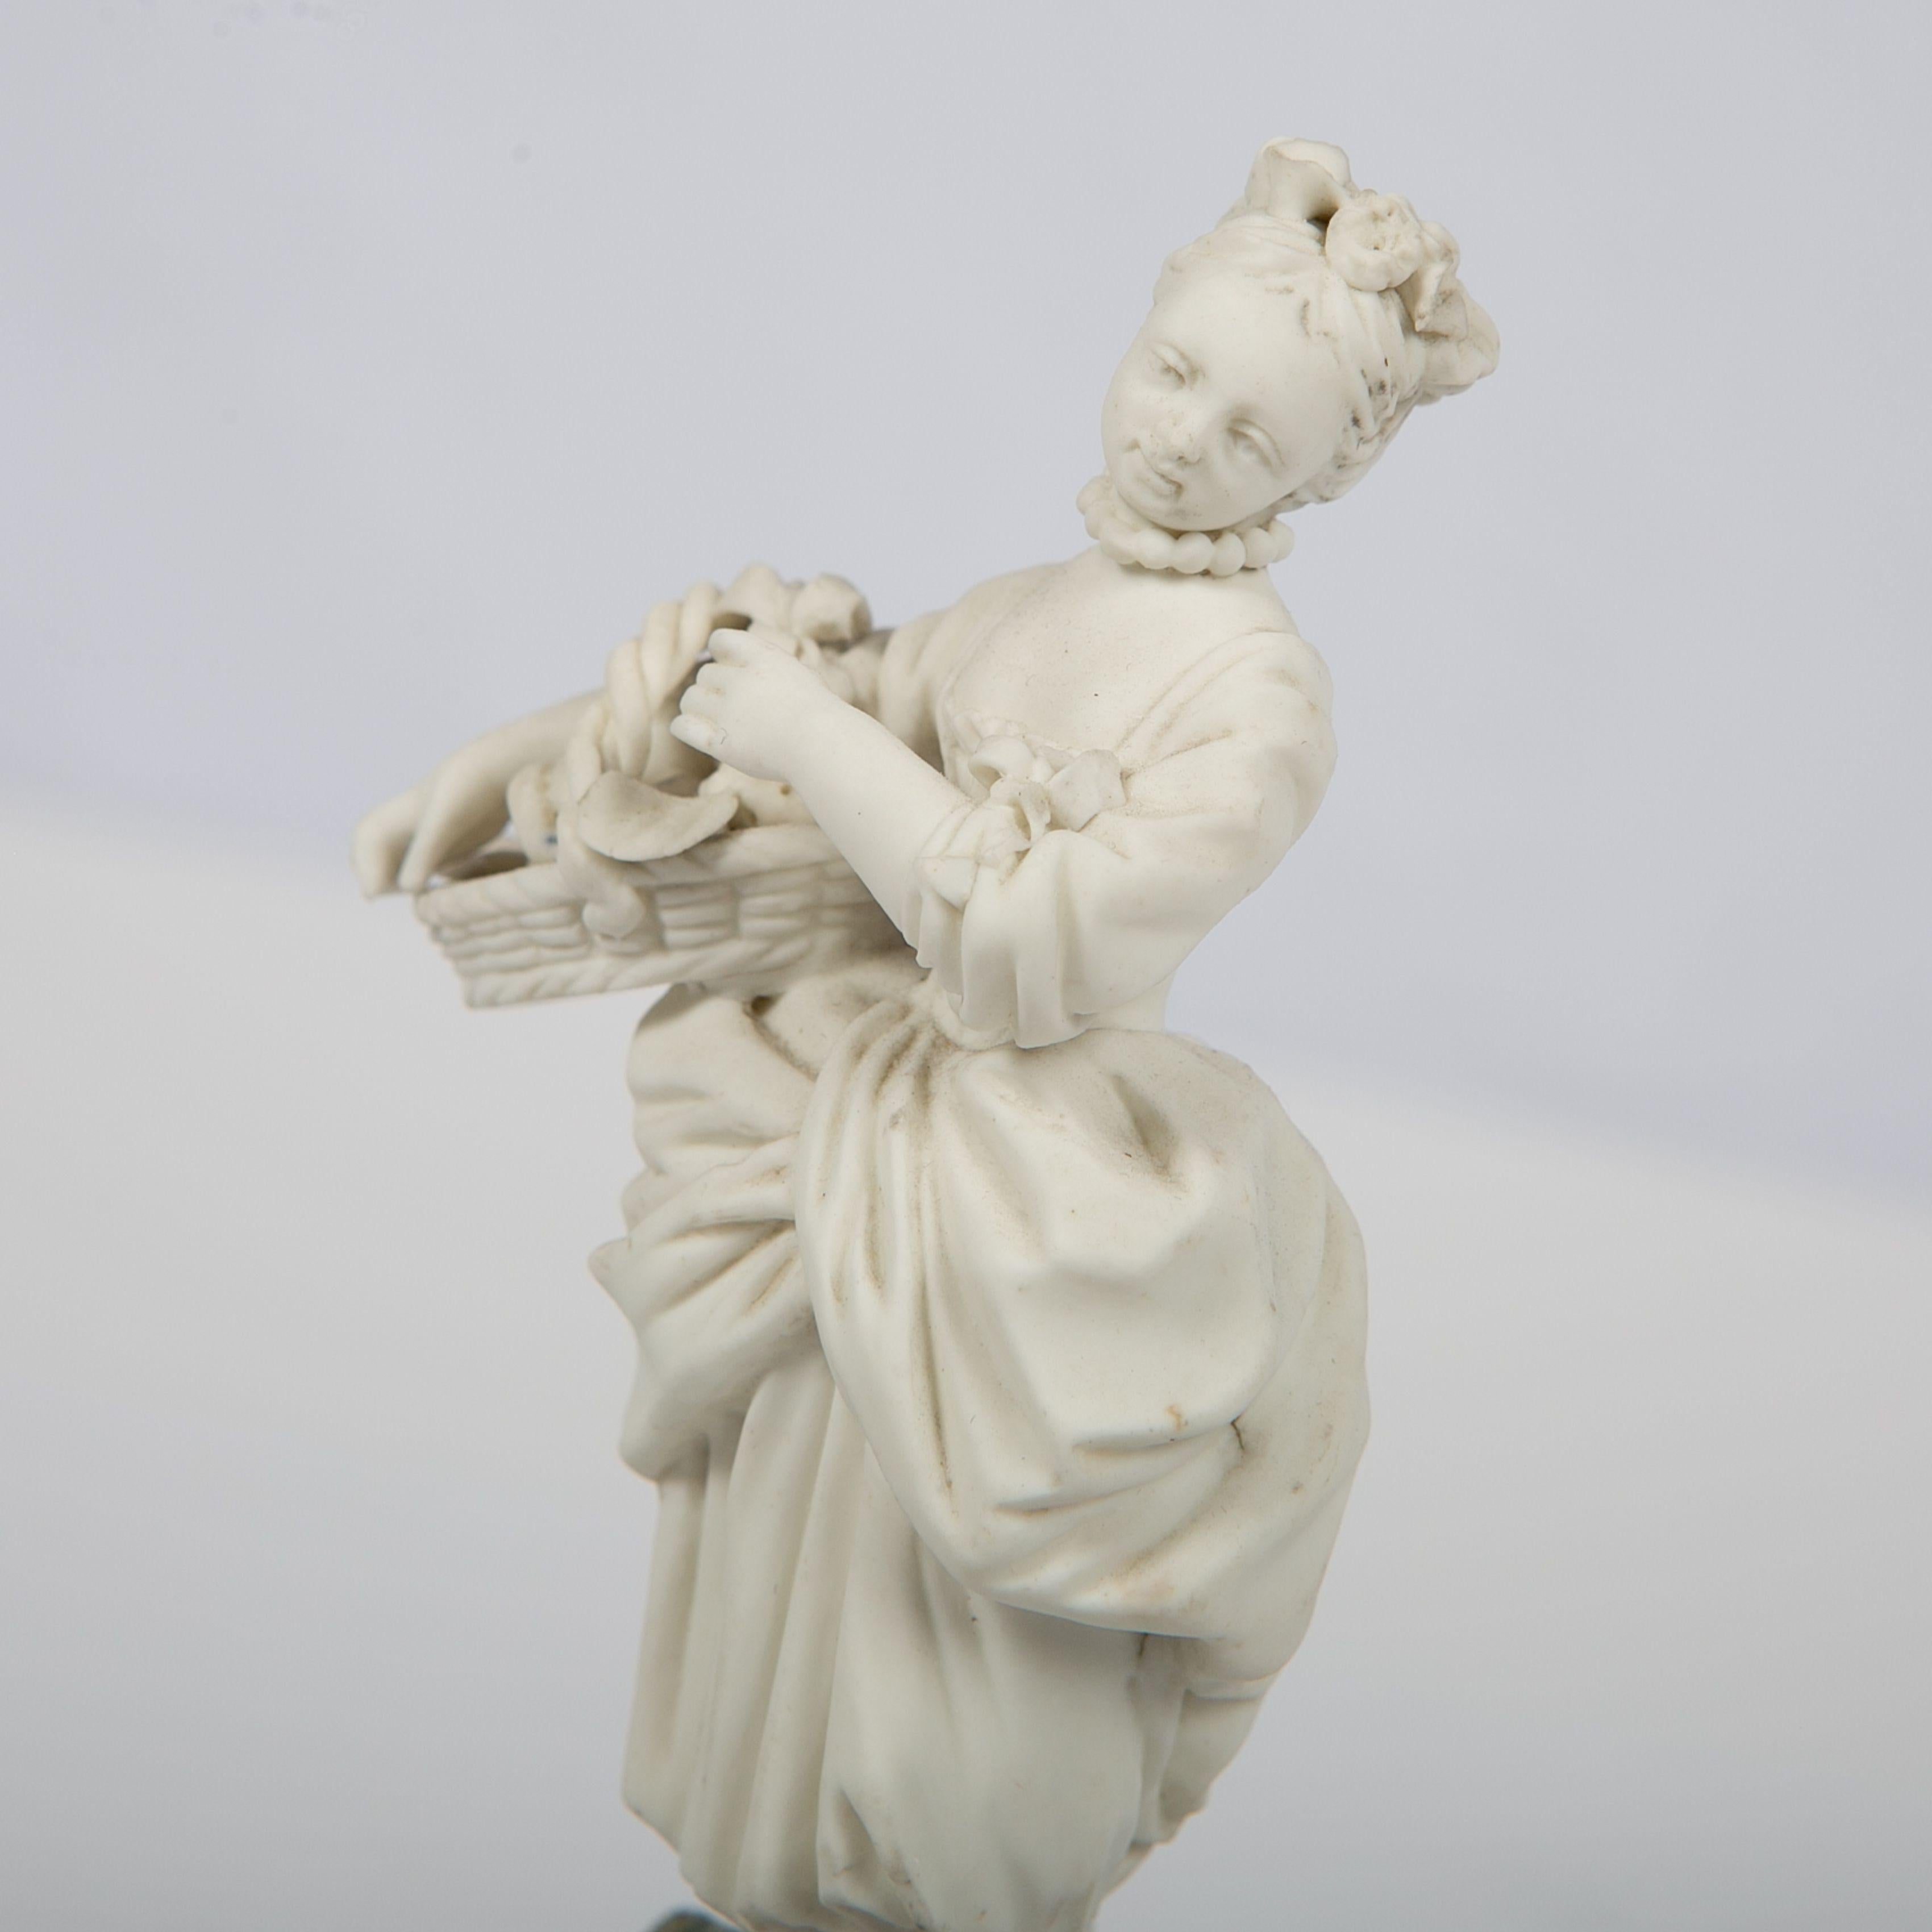 The Mennecy factory made this small and delicate figure of a girl, circa 1770. She is wearing a period costume and holding a basket of fruit. Made of bisque porcelain, the figure is not painted. This allows us to see the details of the model quite